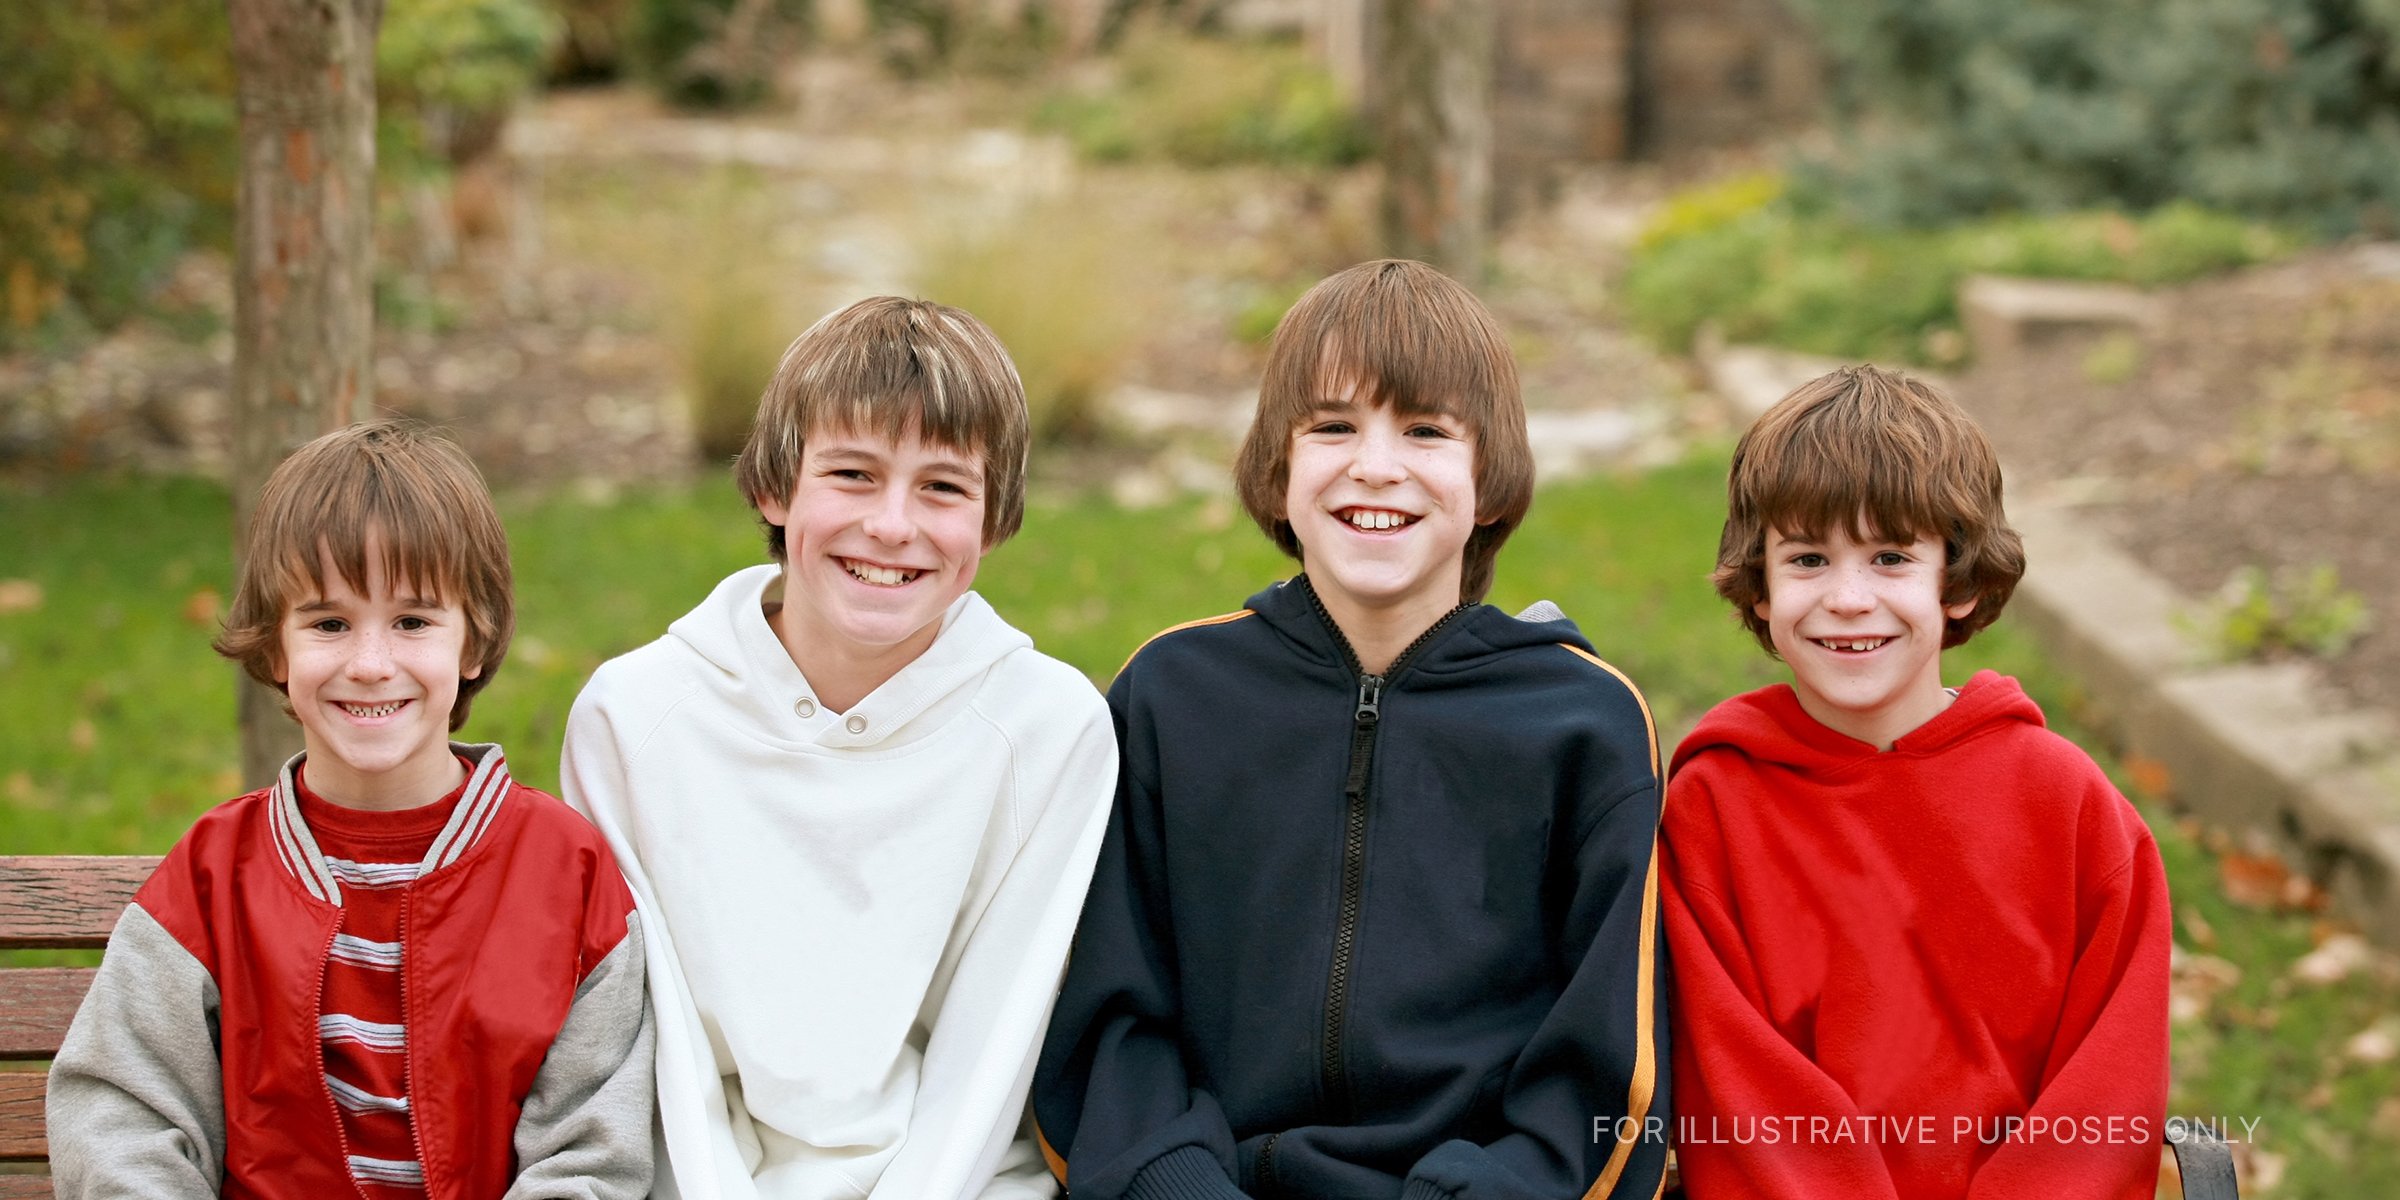 Four Boys Smiling For The Photo. | Source: Shutterstock